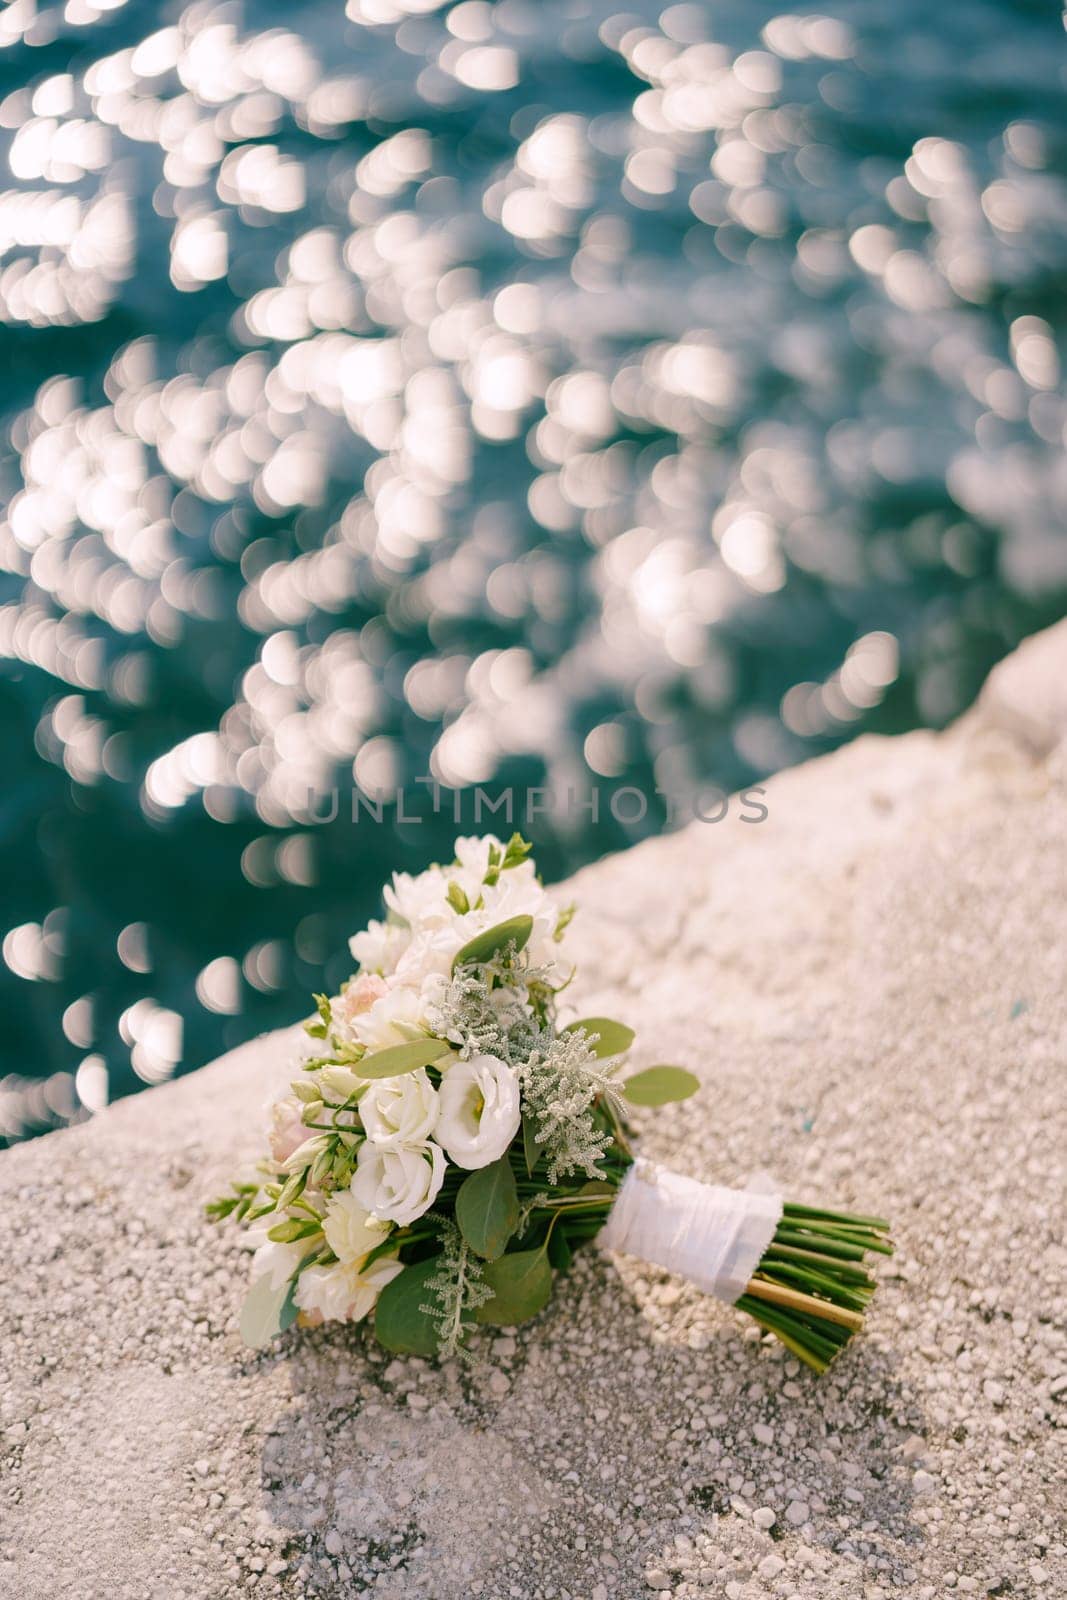 Bridal bouquet lies on a stone border near the shining water by Nadtochiy